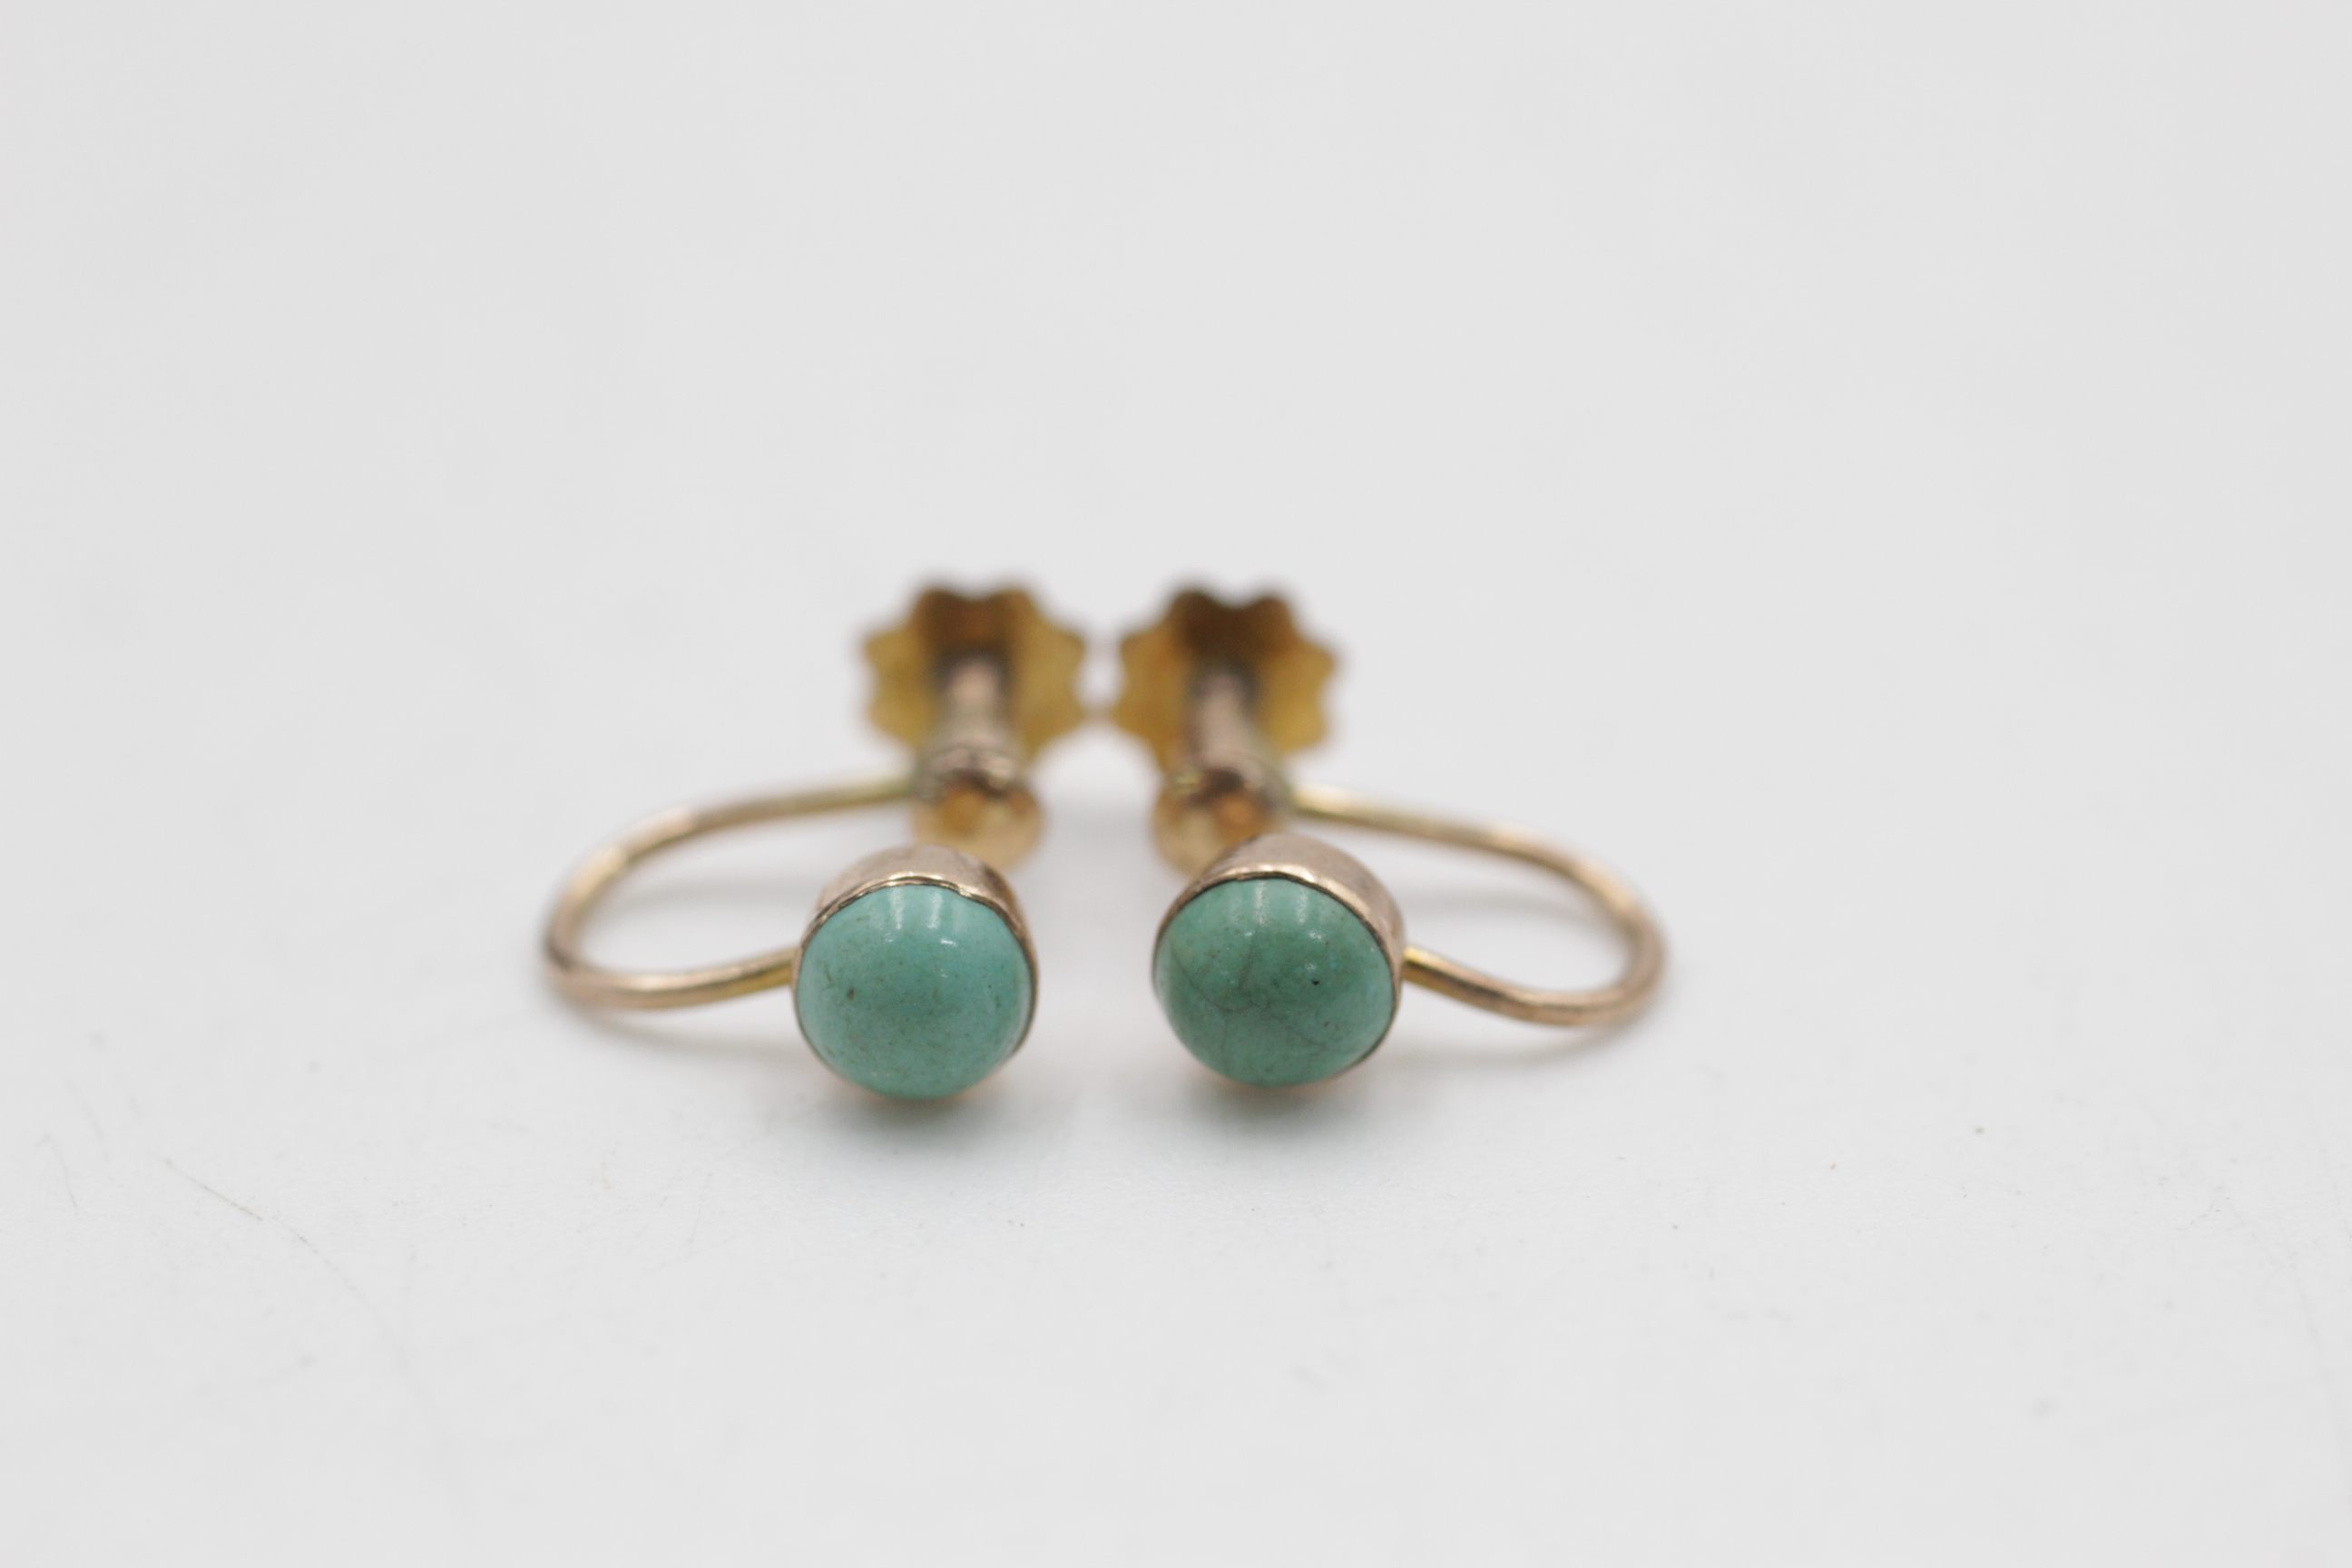 9ct gold vintage turquoise screw-back earrings (0.9g) - Image 2 of 4